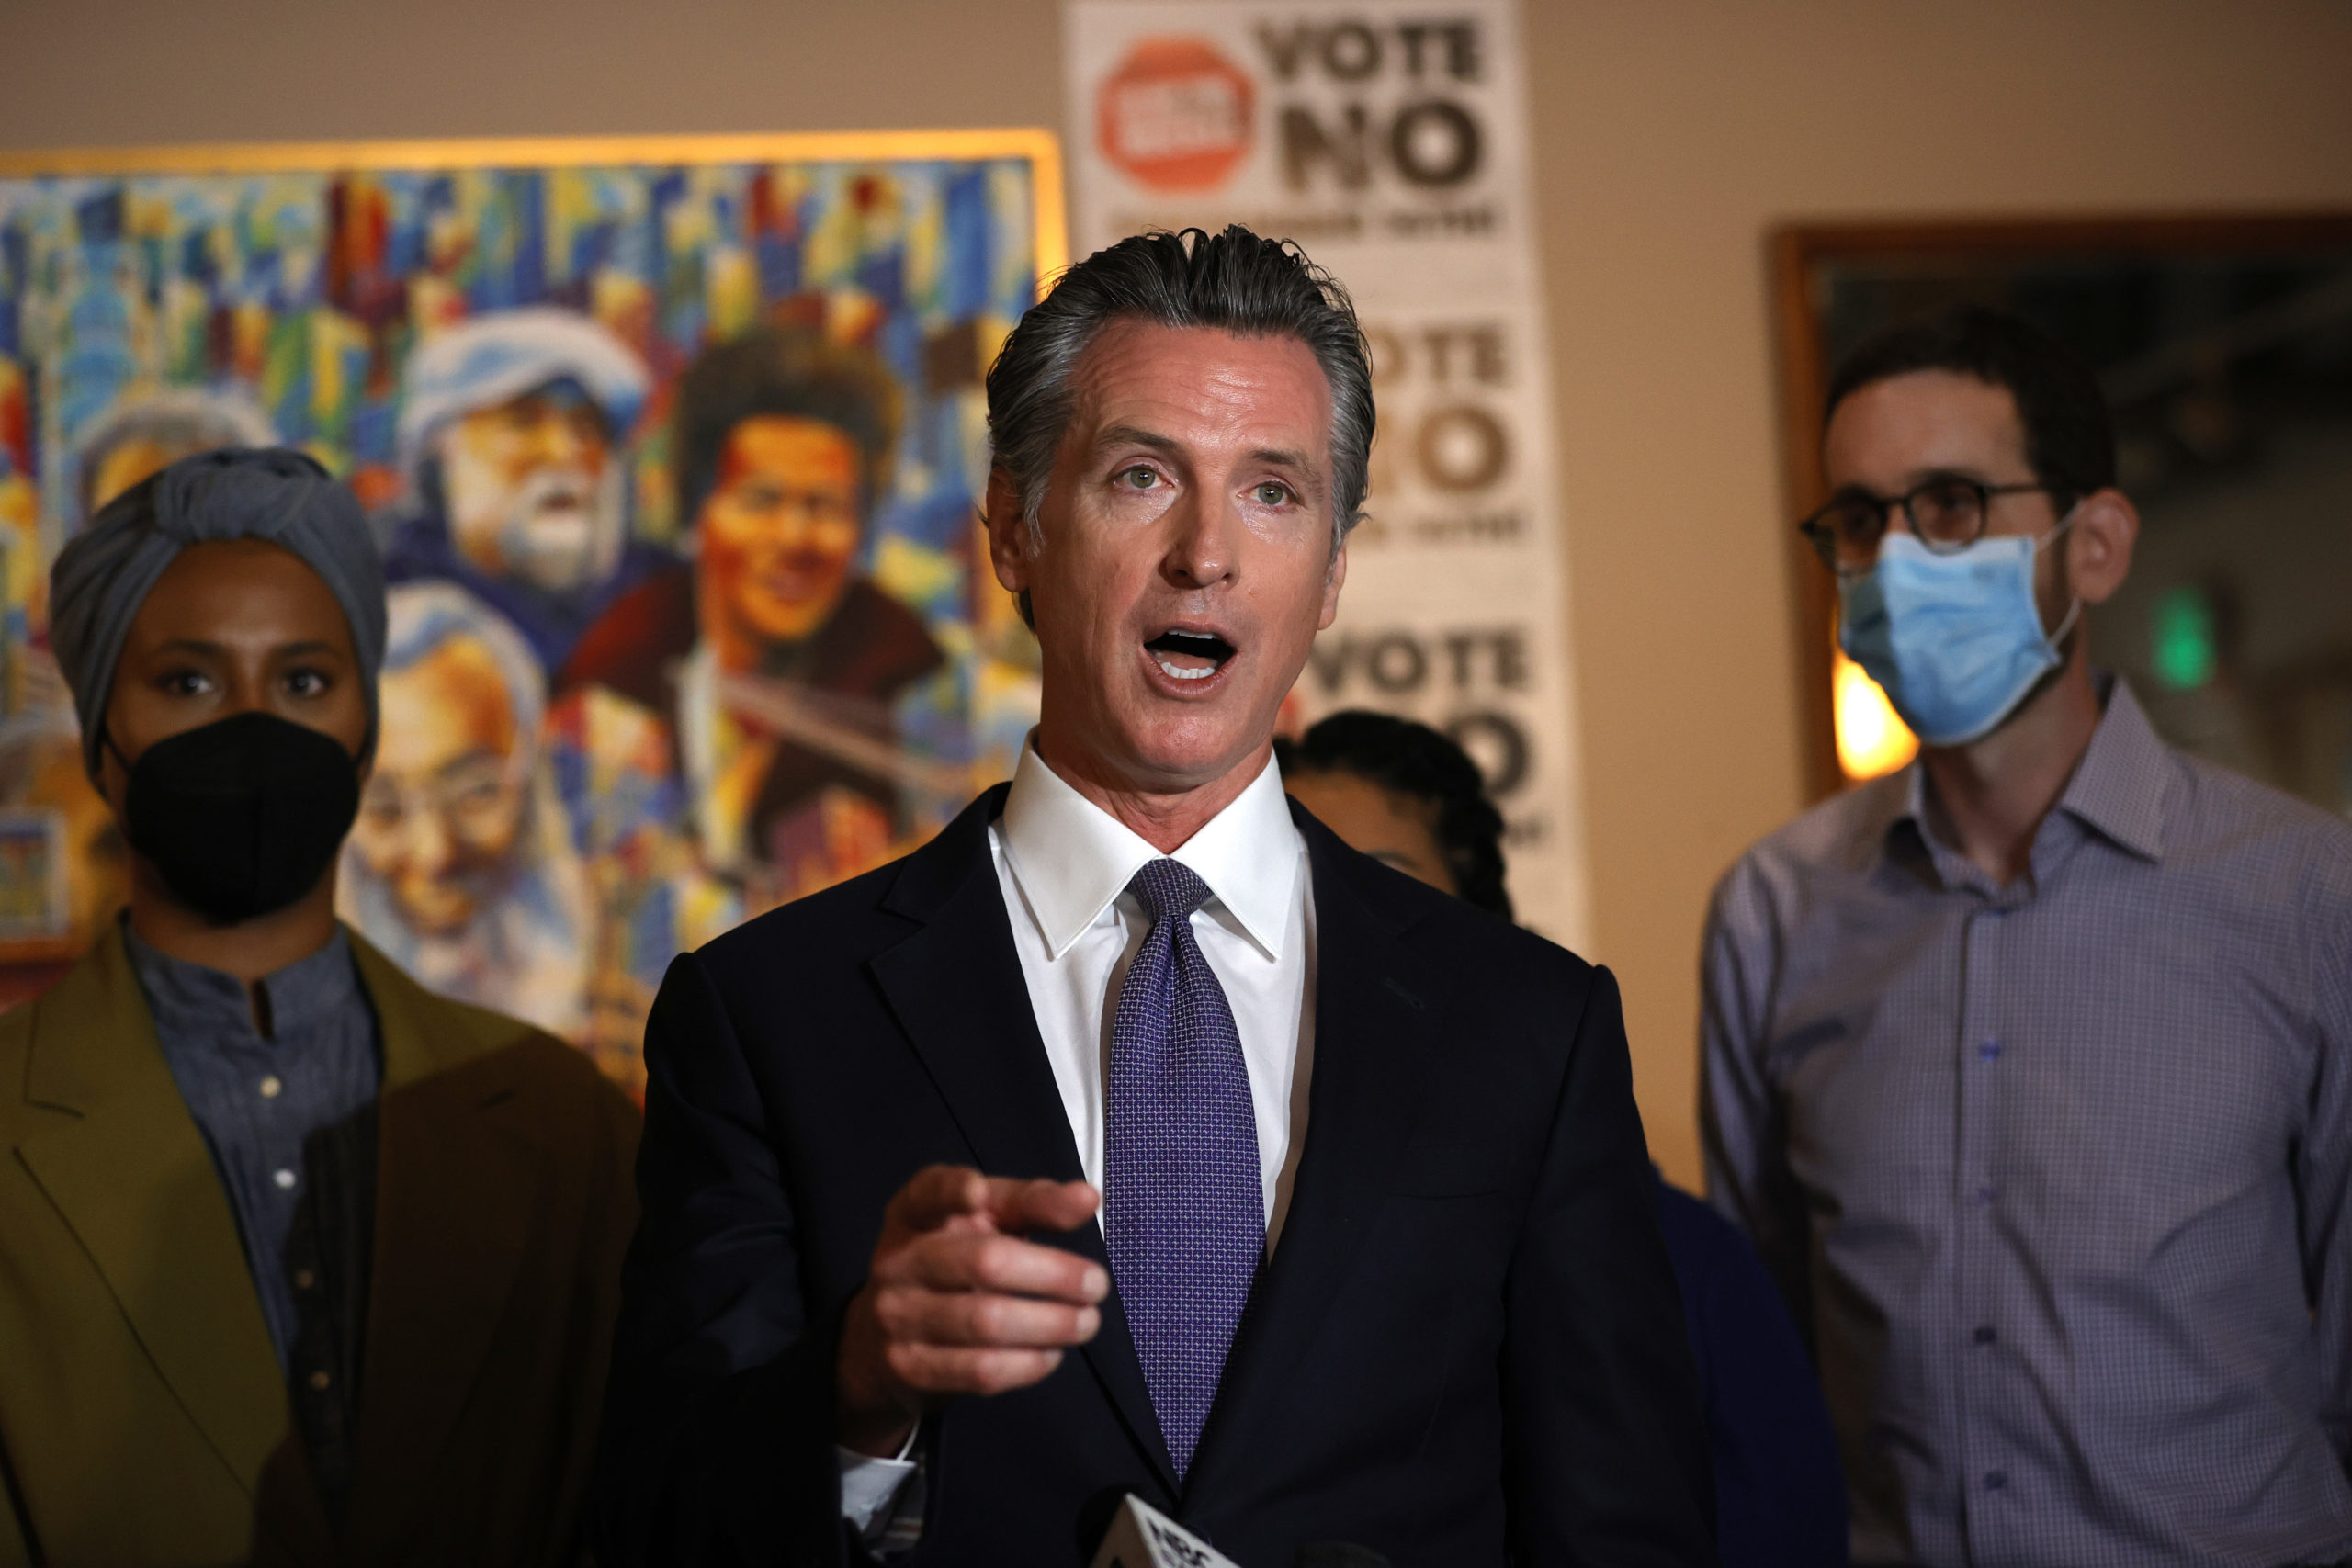 California Gov. Gavin Newsom speaks during a news conference at Manny's on August 13, 2021 in San Francisco, California. California Gov. Gavin Newsom kicked off his "Say No" to recall campaign as he prepares to face a recall election on September 14. (Photo by Justin Sullivan/Getty Images)